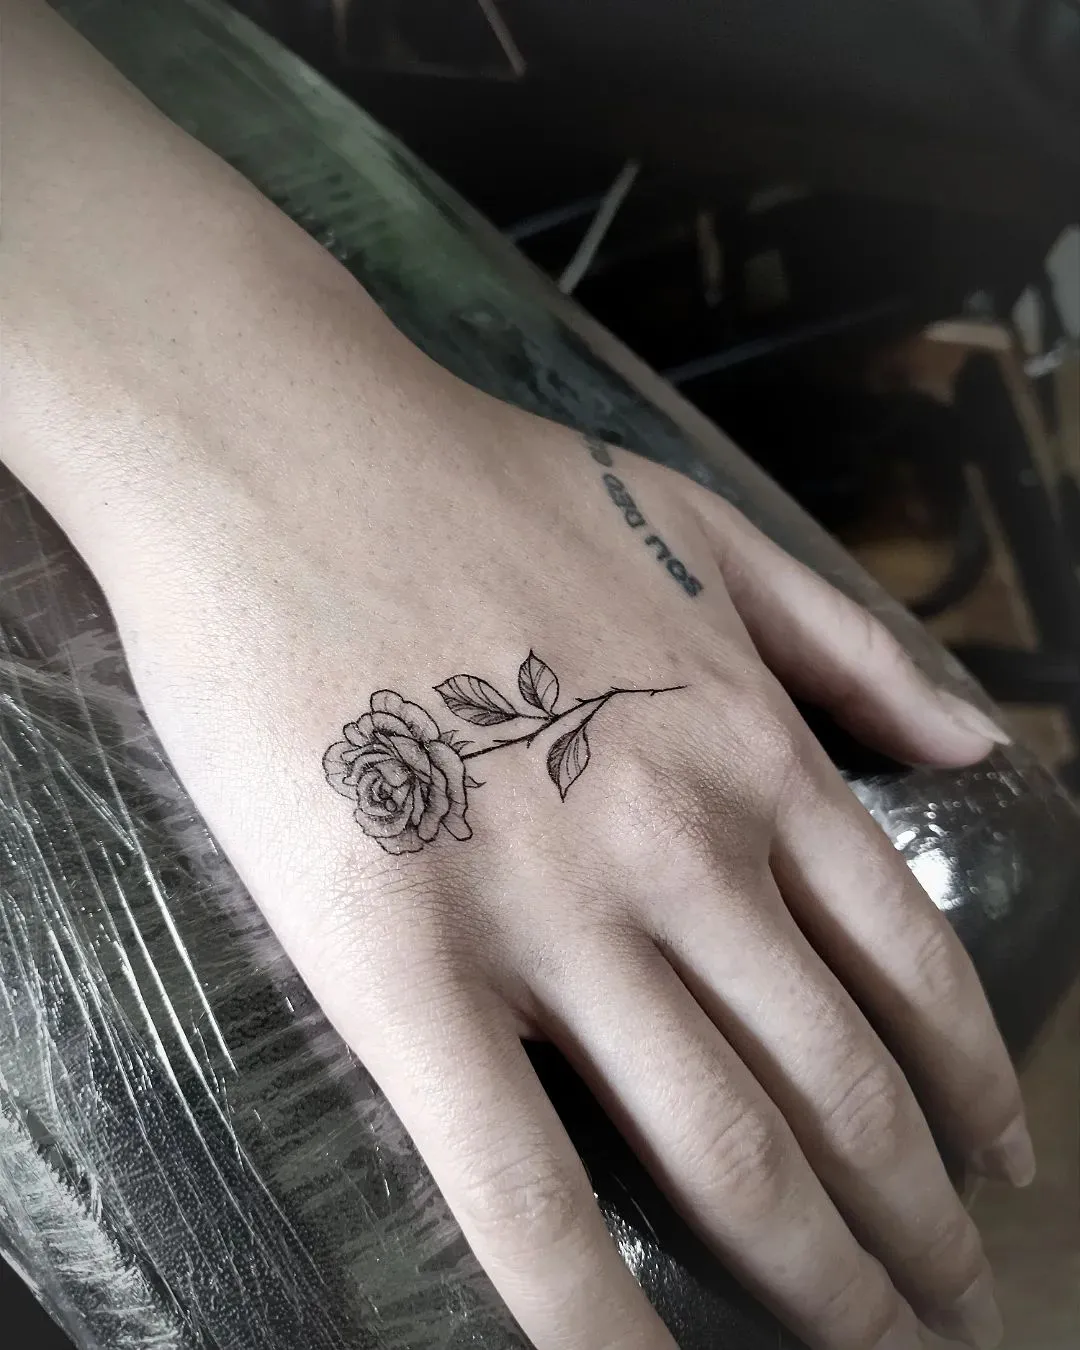 Delicate rose outline as girly side of hand tattoo designs